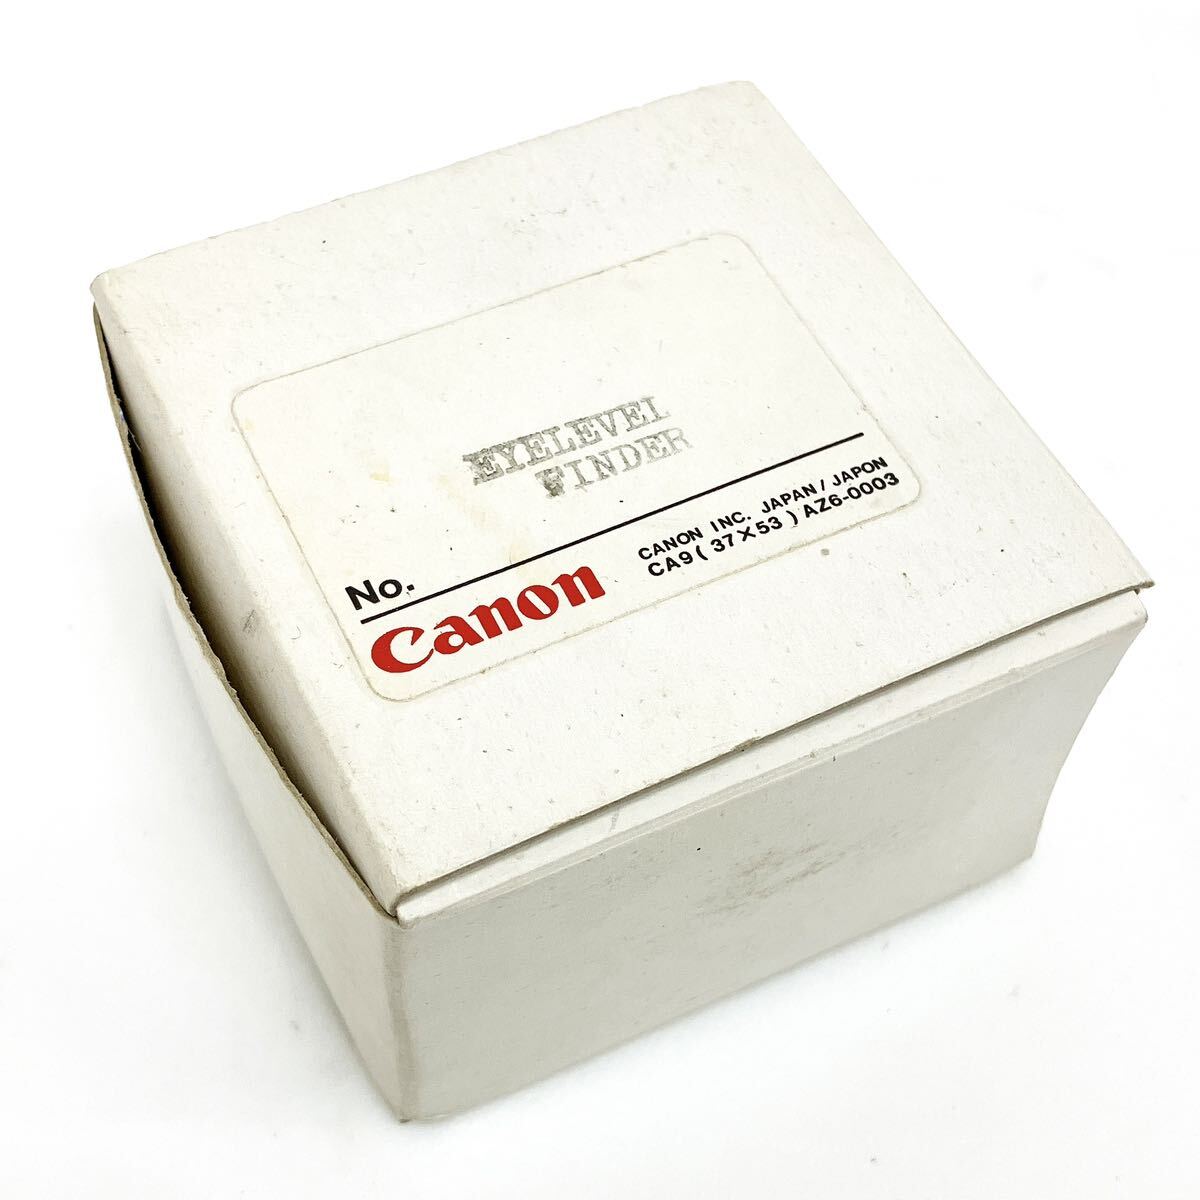  old F-1 for Canon EYELEVEL FINDER origin box attaching Canon I Revell finder camera parts accessories alp river 0415